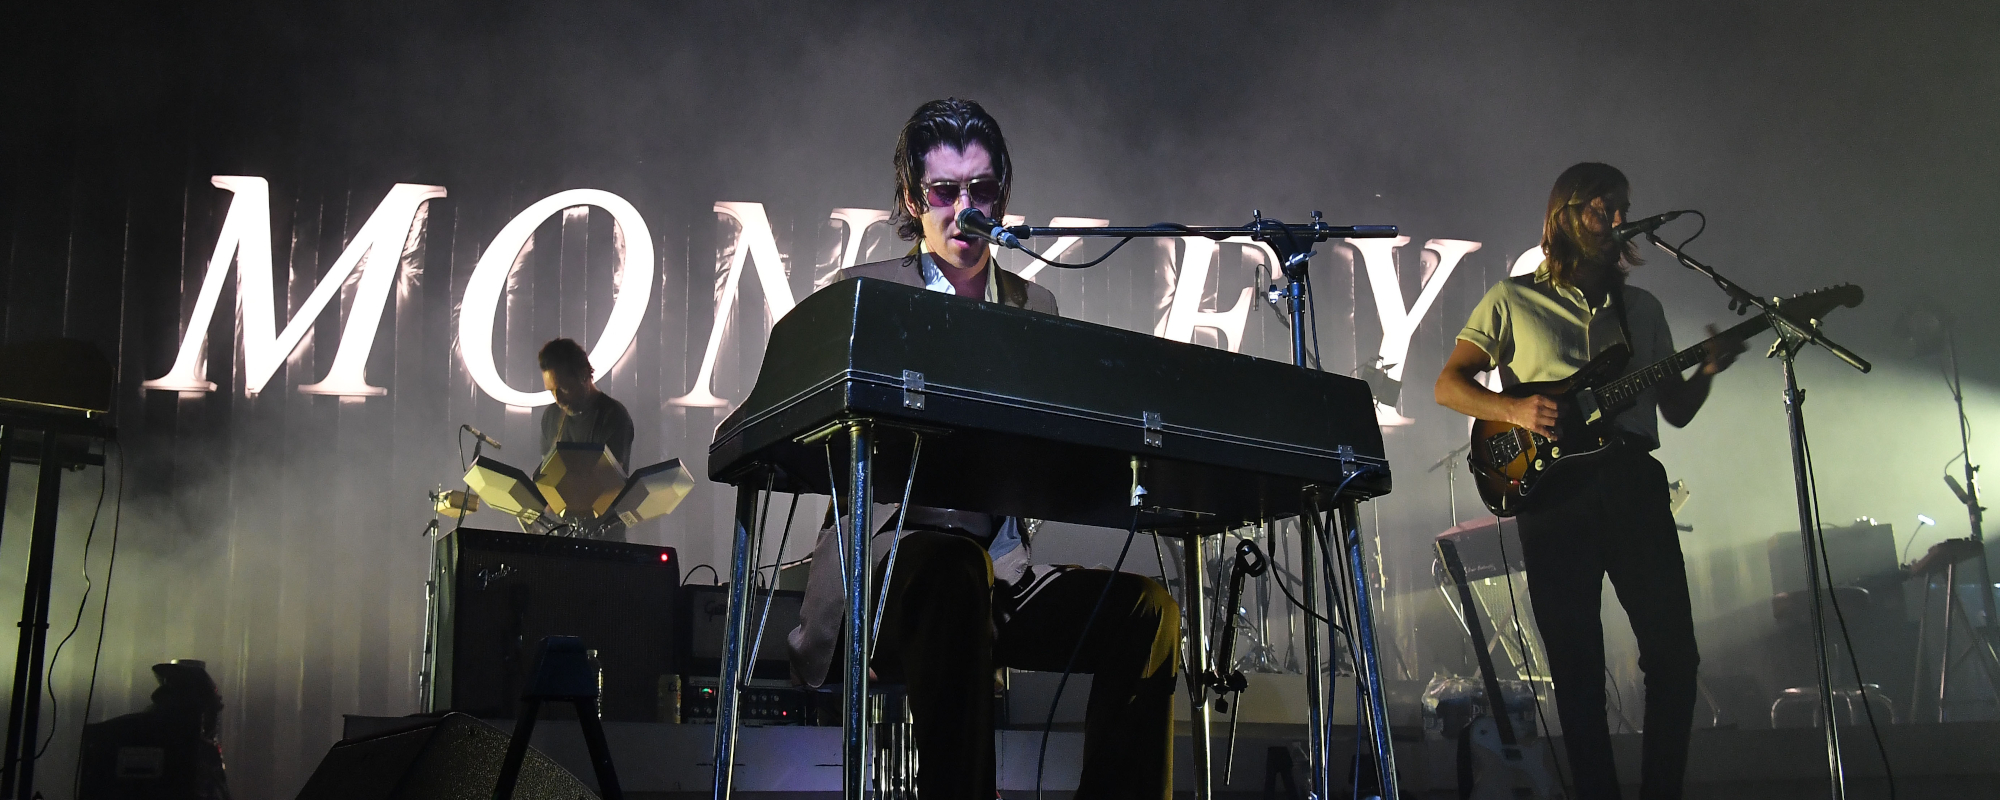 Watch Arctic Monkeys Inject a String Section into Their Live Show in Dublin